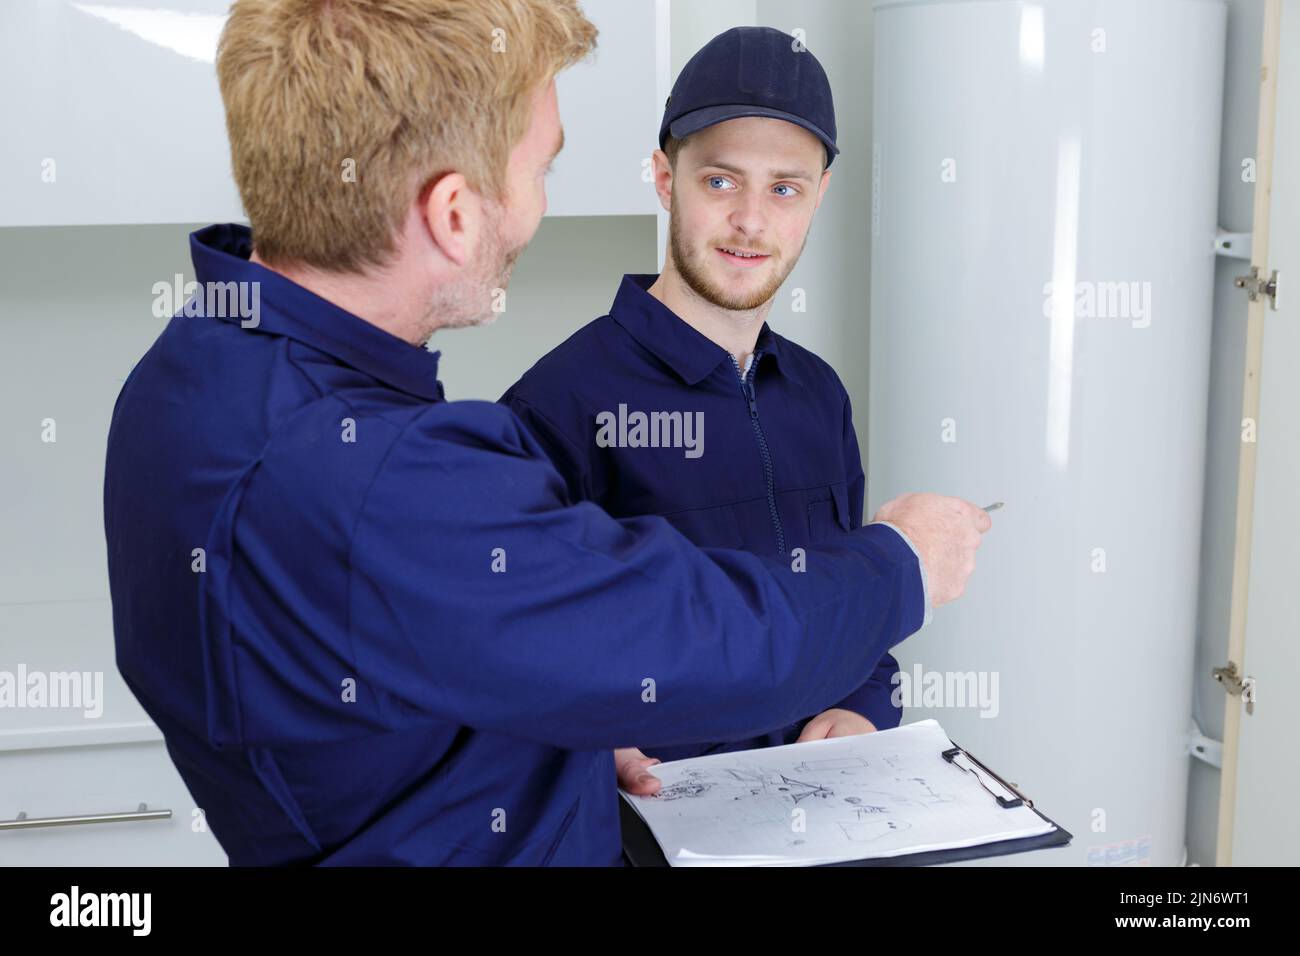 trainee plumber working on boiler with male engineer Stock Photo